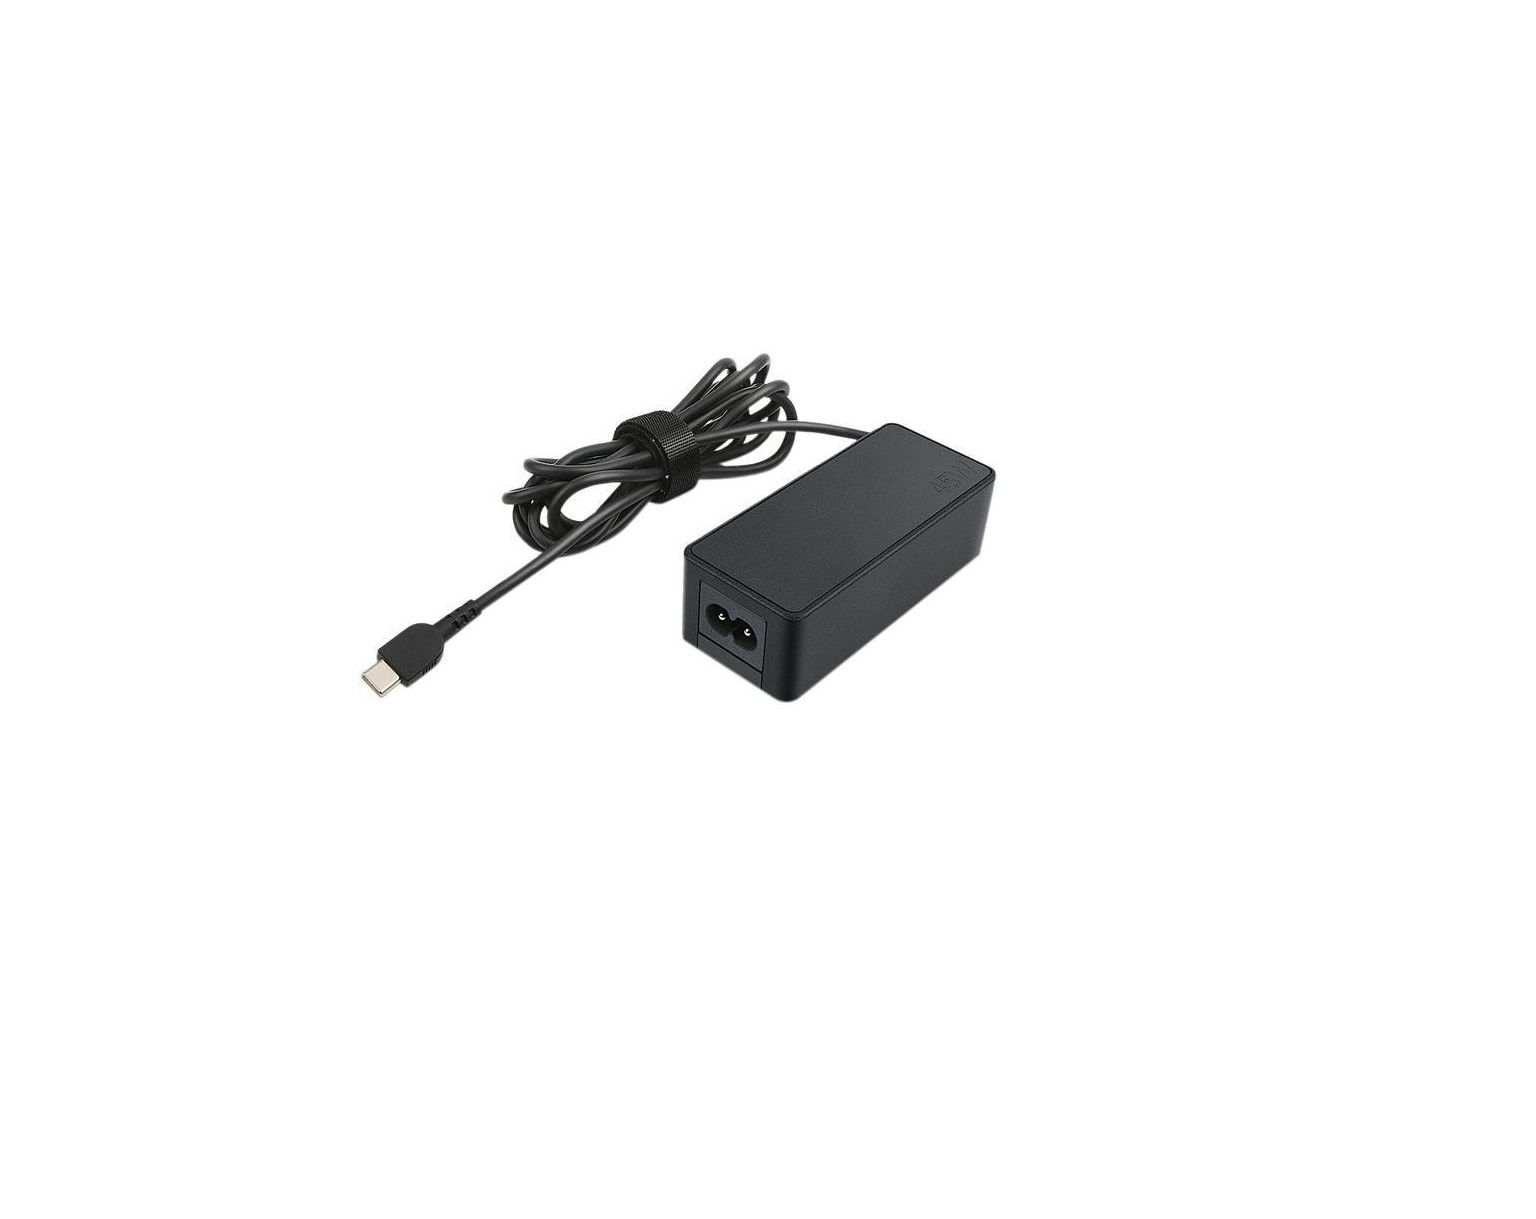 Lenovo Genuine 45W Standard USB Type-C AC Adapter For Notebooks and Tablets 4X20M26252